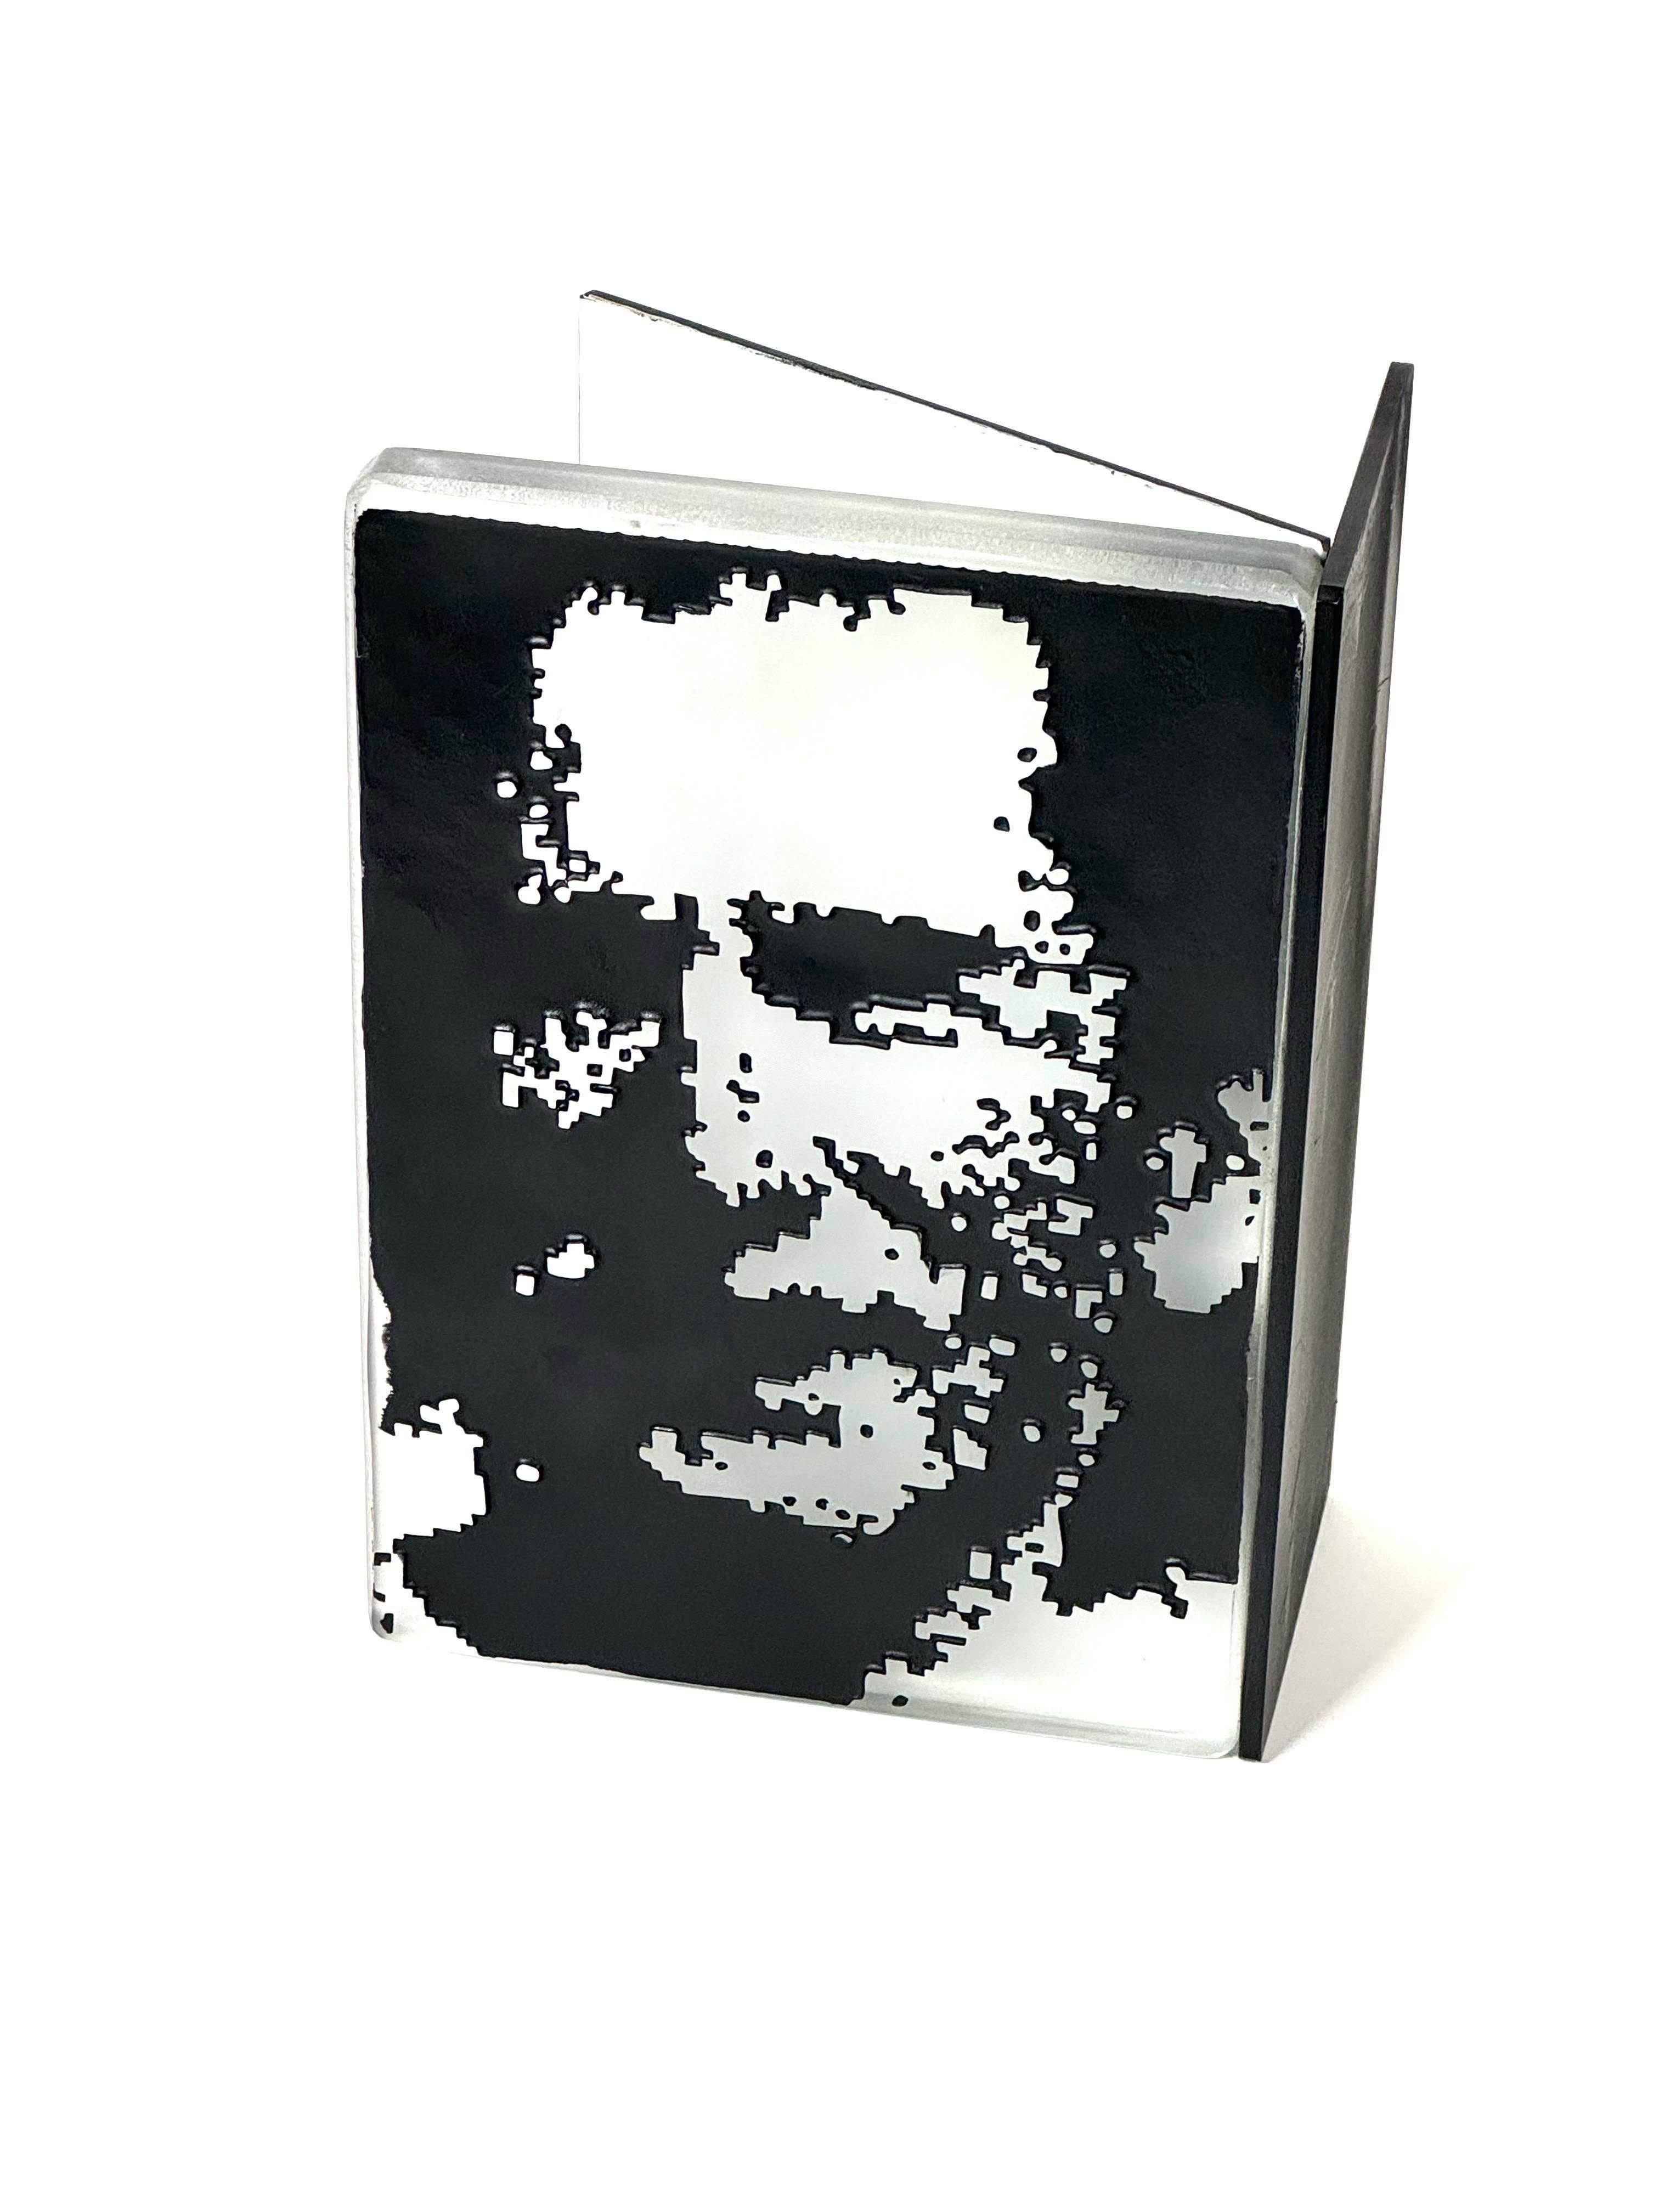 Abstract portrait rendered in welded steel and molded glass. Created in 2009 and signed by the artist. The sculpture has separate panel painted white to reflect light into the molded glass and the create a netural background. The image is a